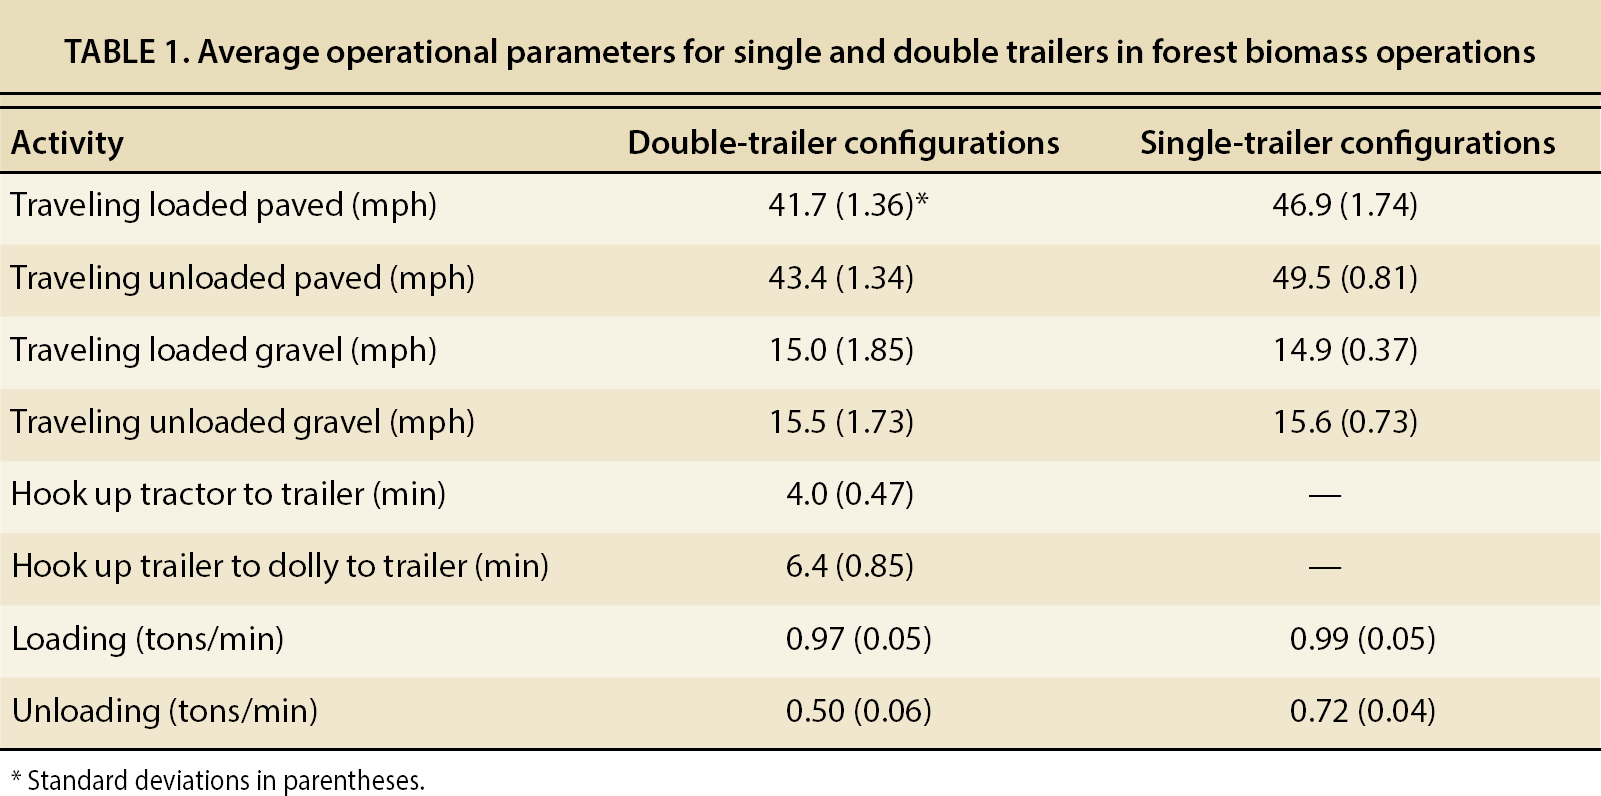 Average operational parameters for single and double trailers in forest biomass operations